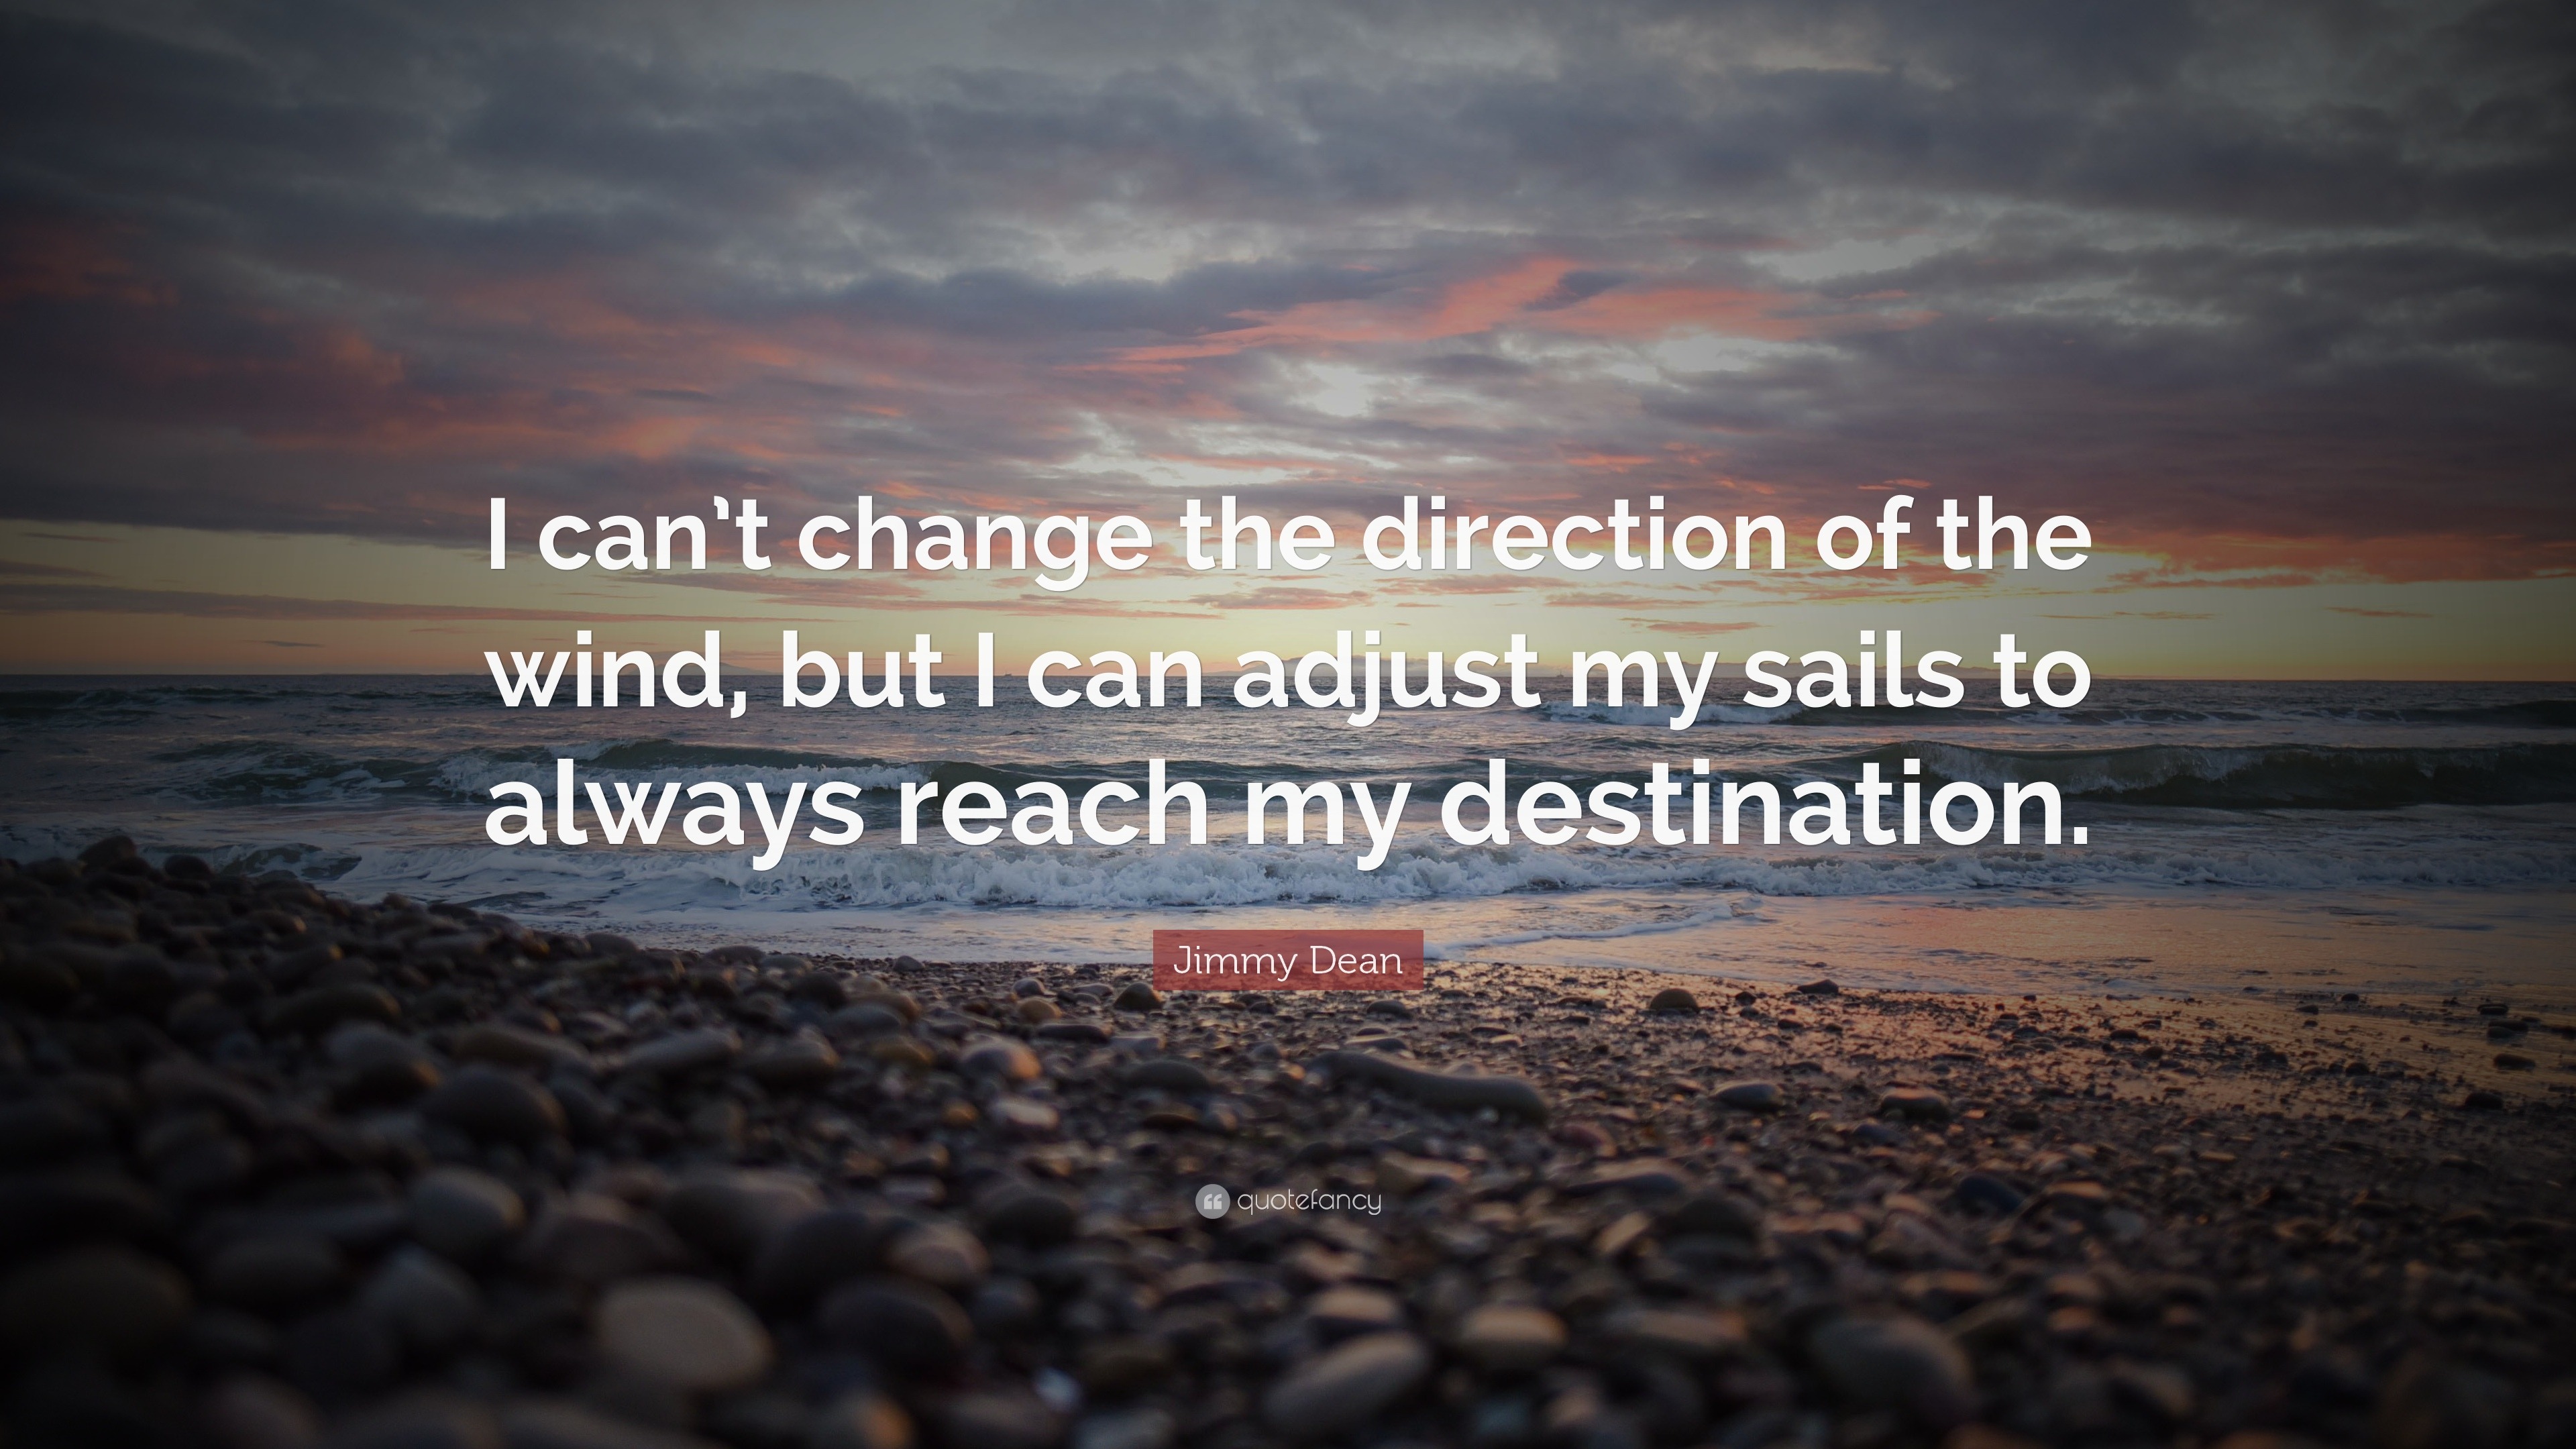 Jimmy Dean Quote: “I can’t change the direction of the wind, but I can